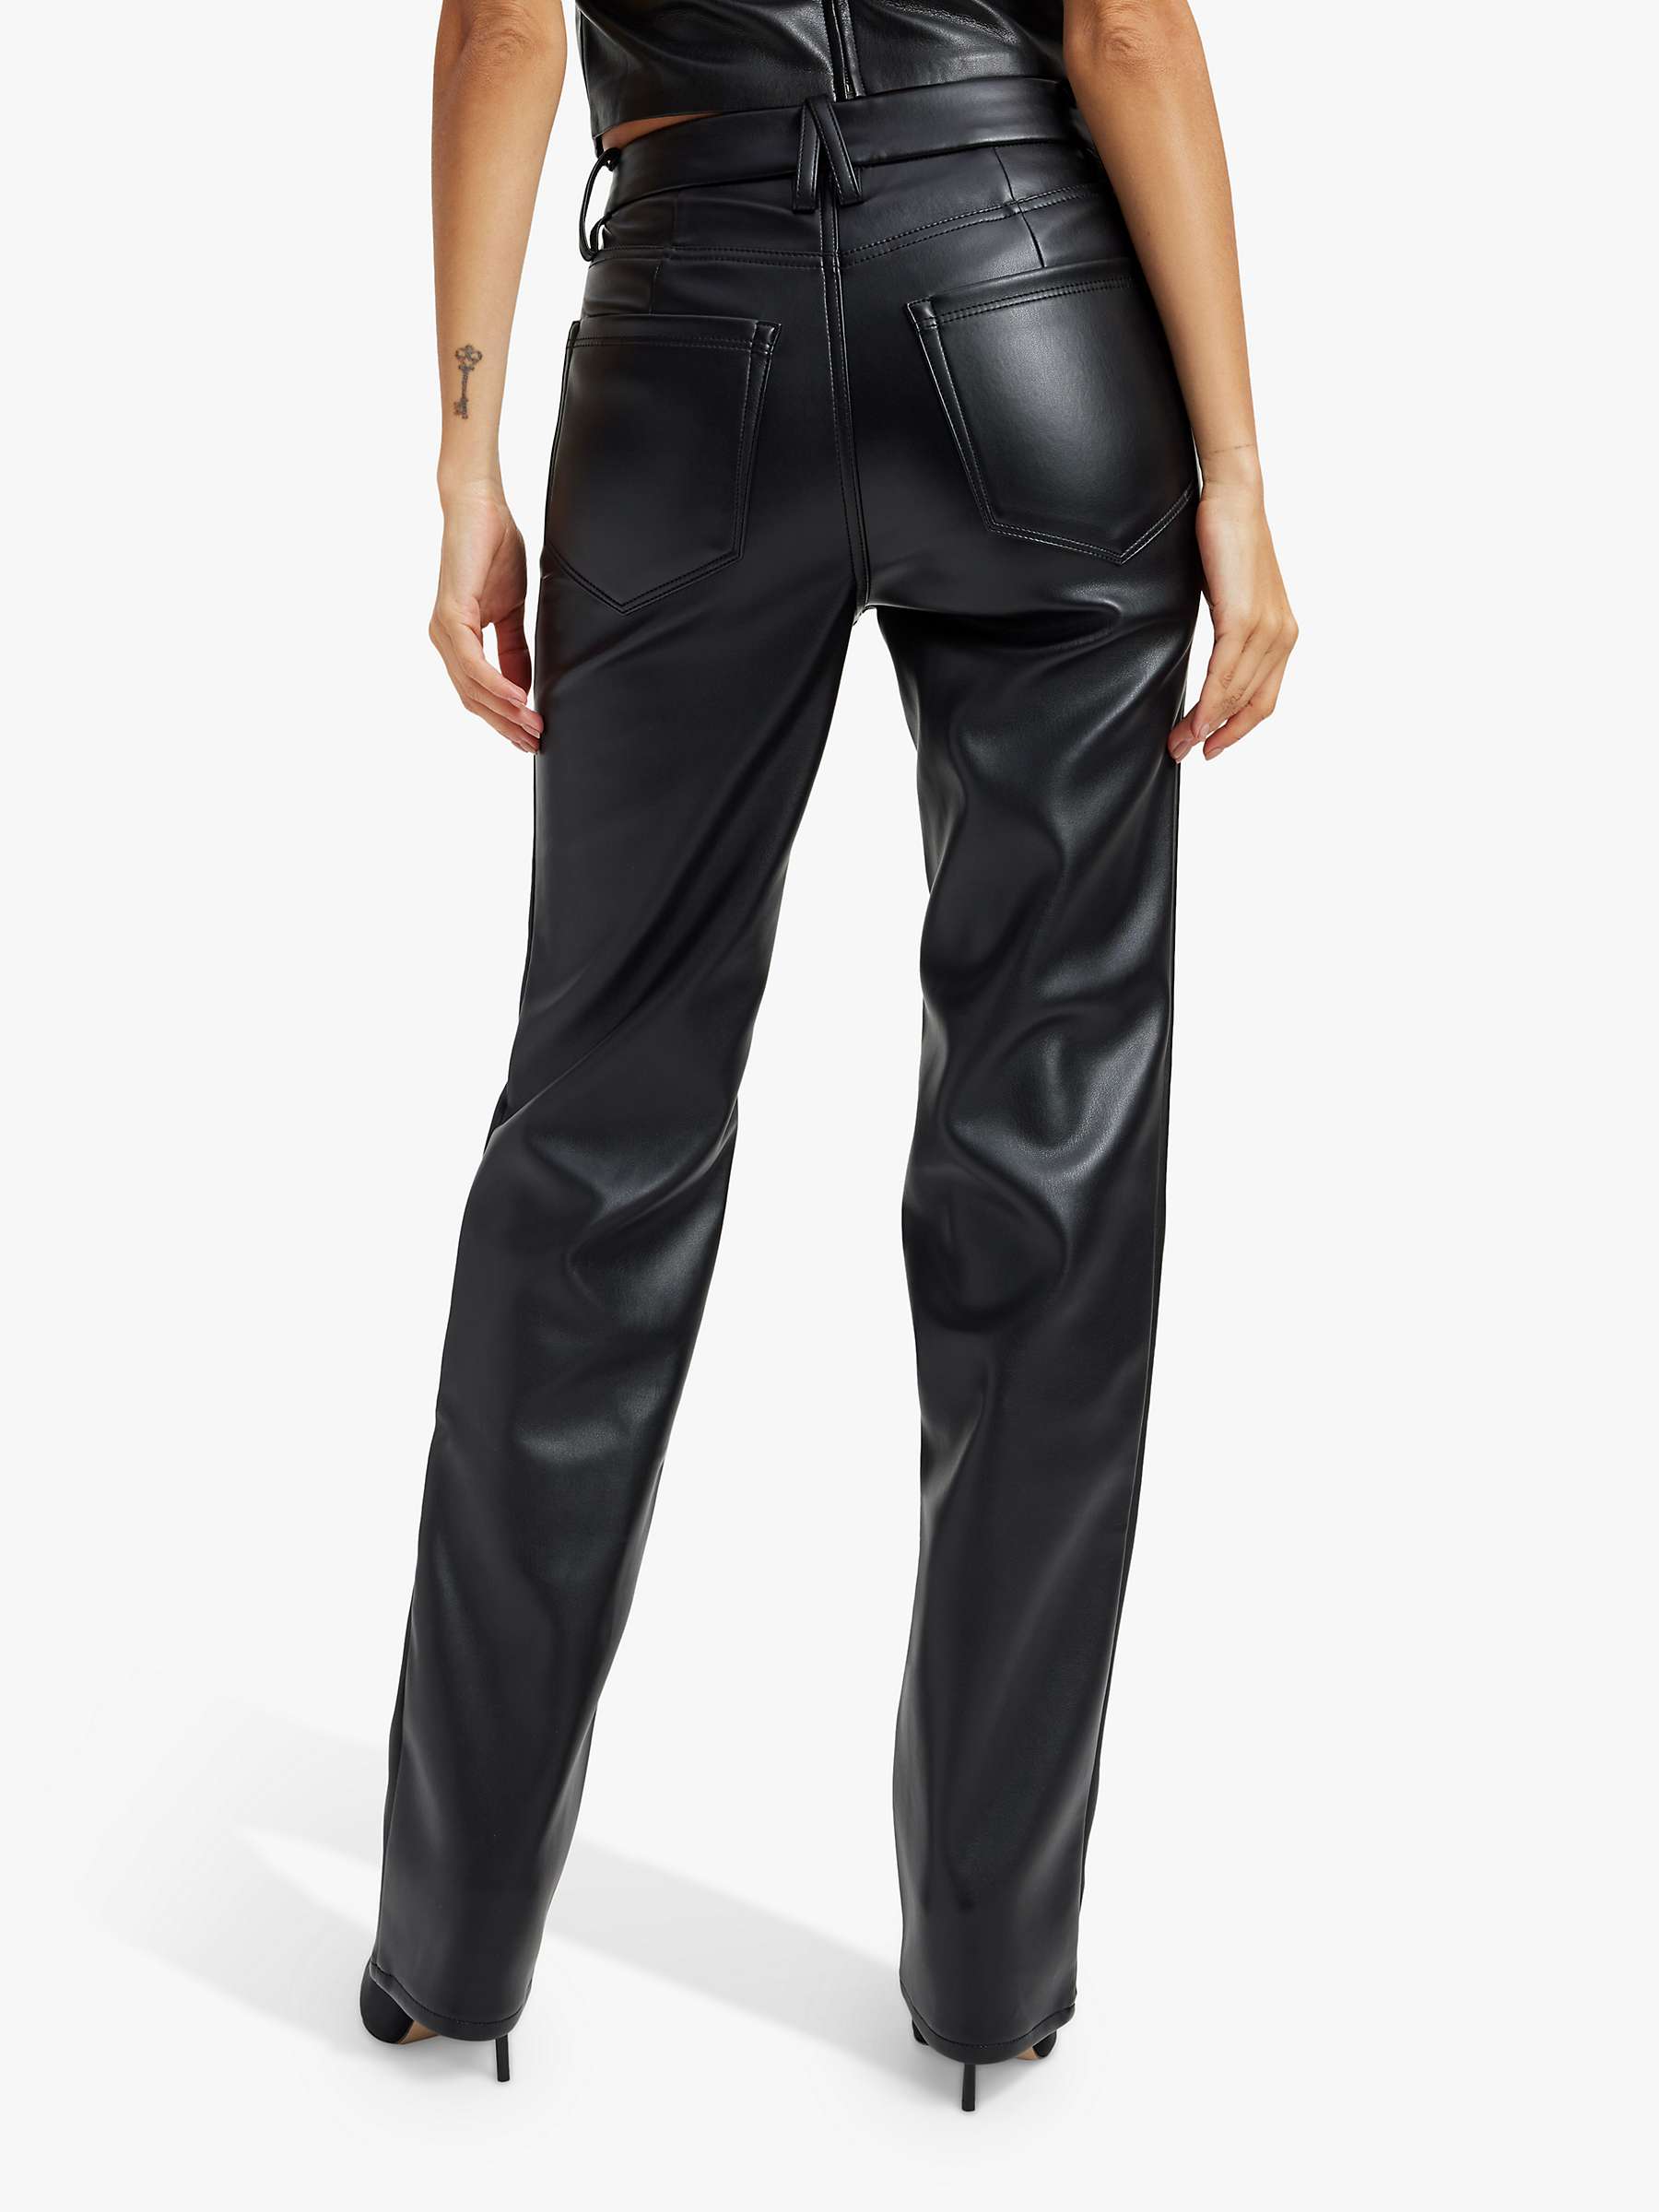 Buy Good American Better Than Leather Straight Cut Jeans Online at johnlewis.com